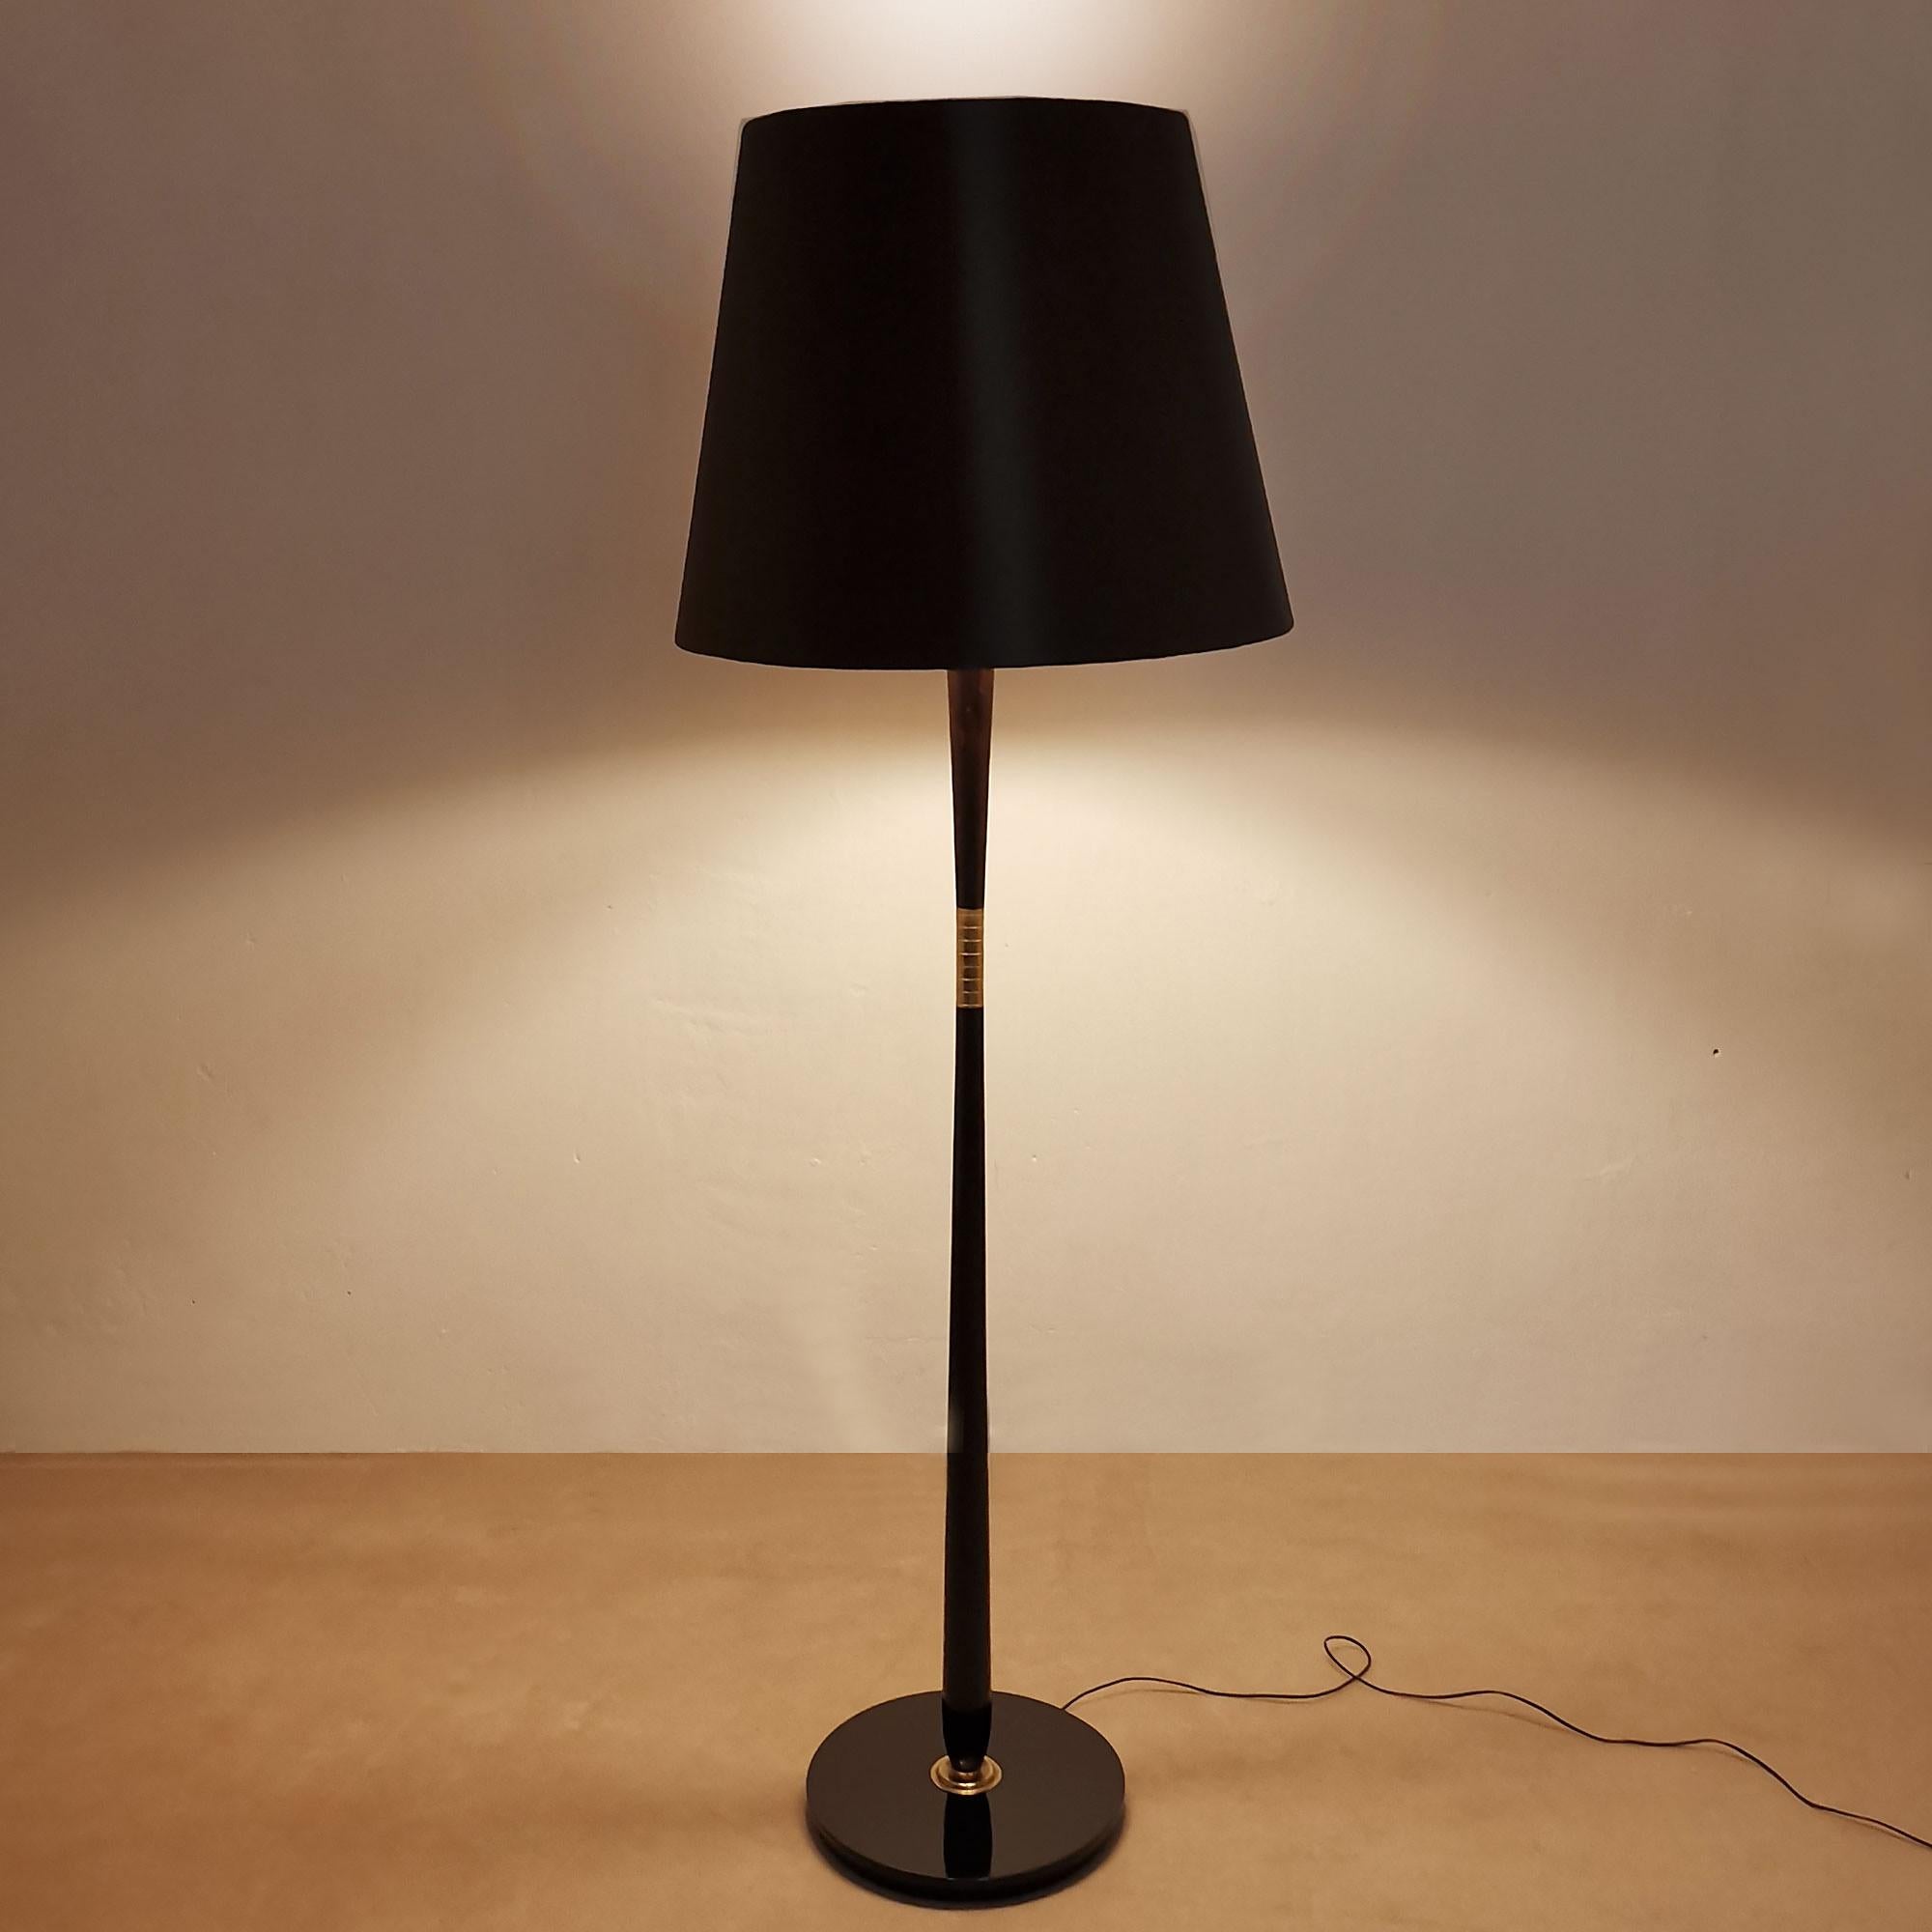 Mid-Century Modern Standing Lamp with Double Lighting System - Italy, 1940s For Sale 2